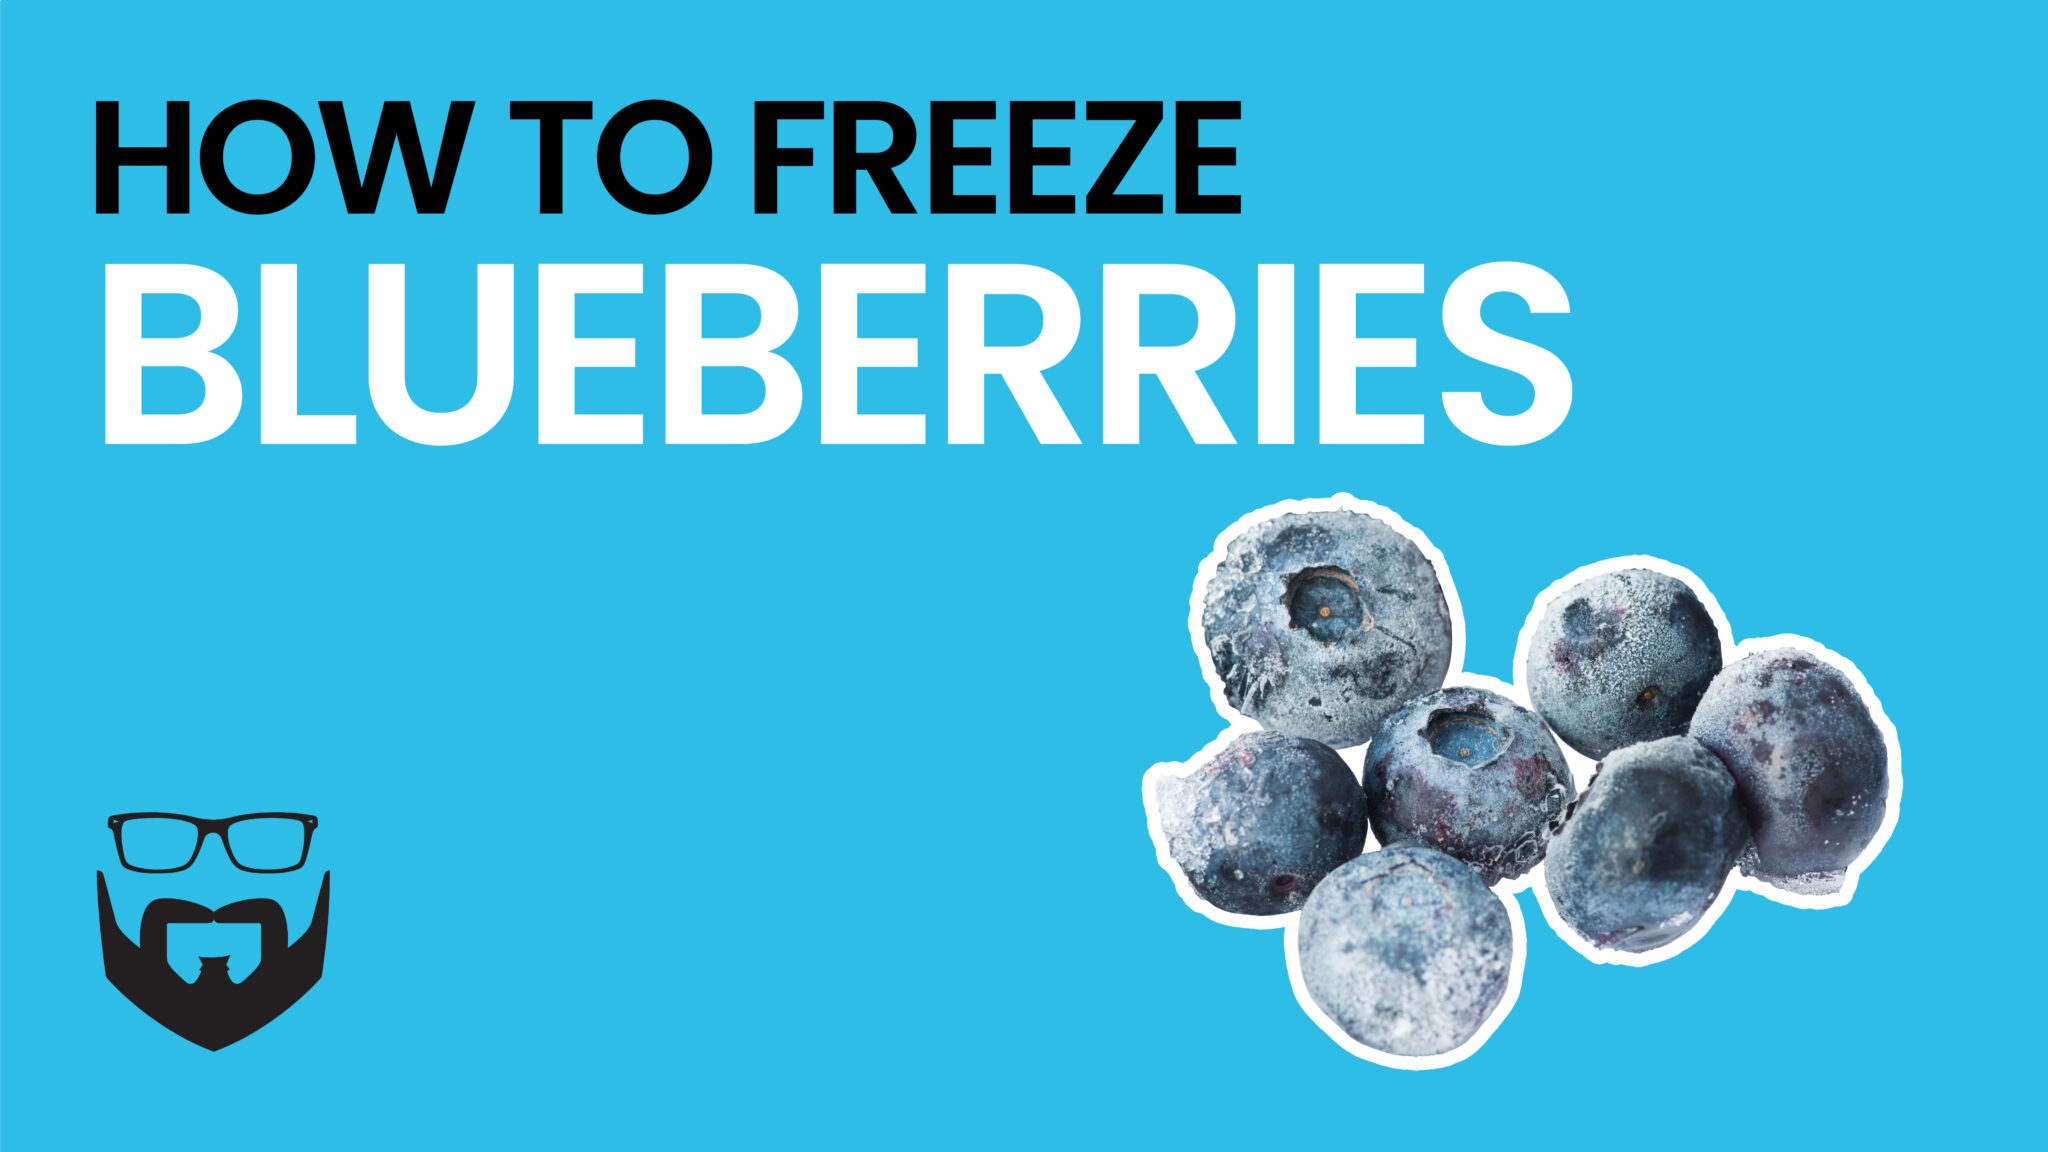 How to Freeze Blueberries Video - Blue